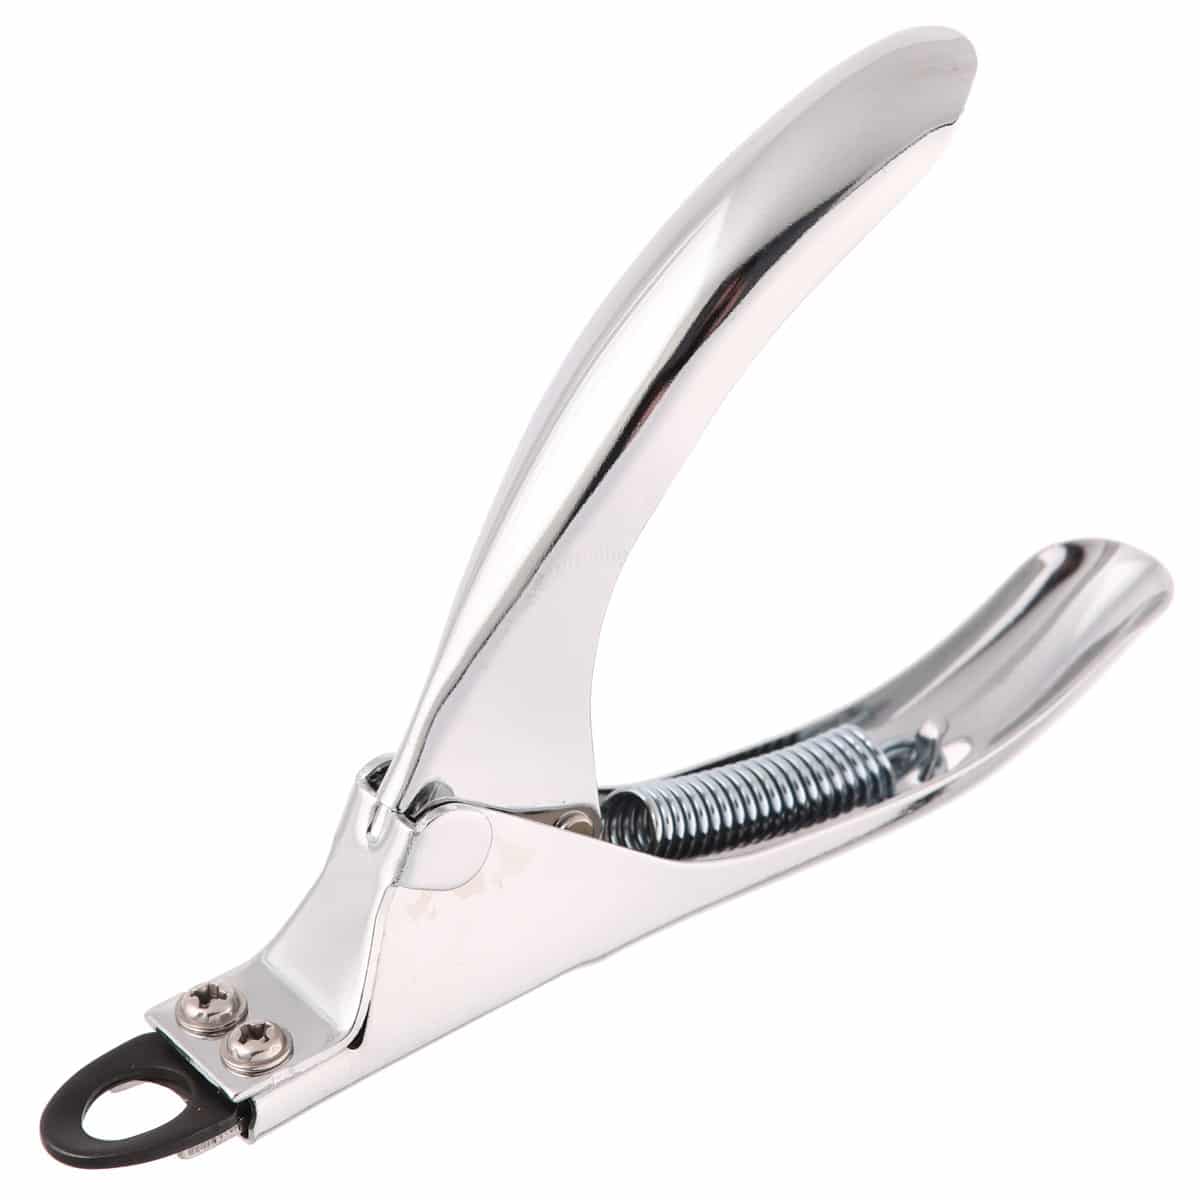 Groom Professional guillotine nail clippers grooming